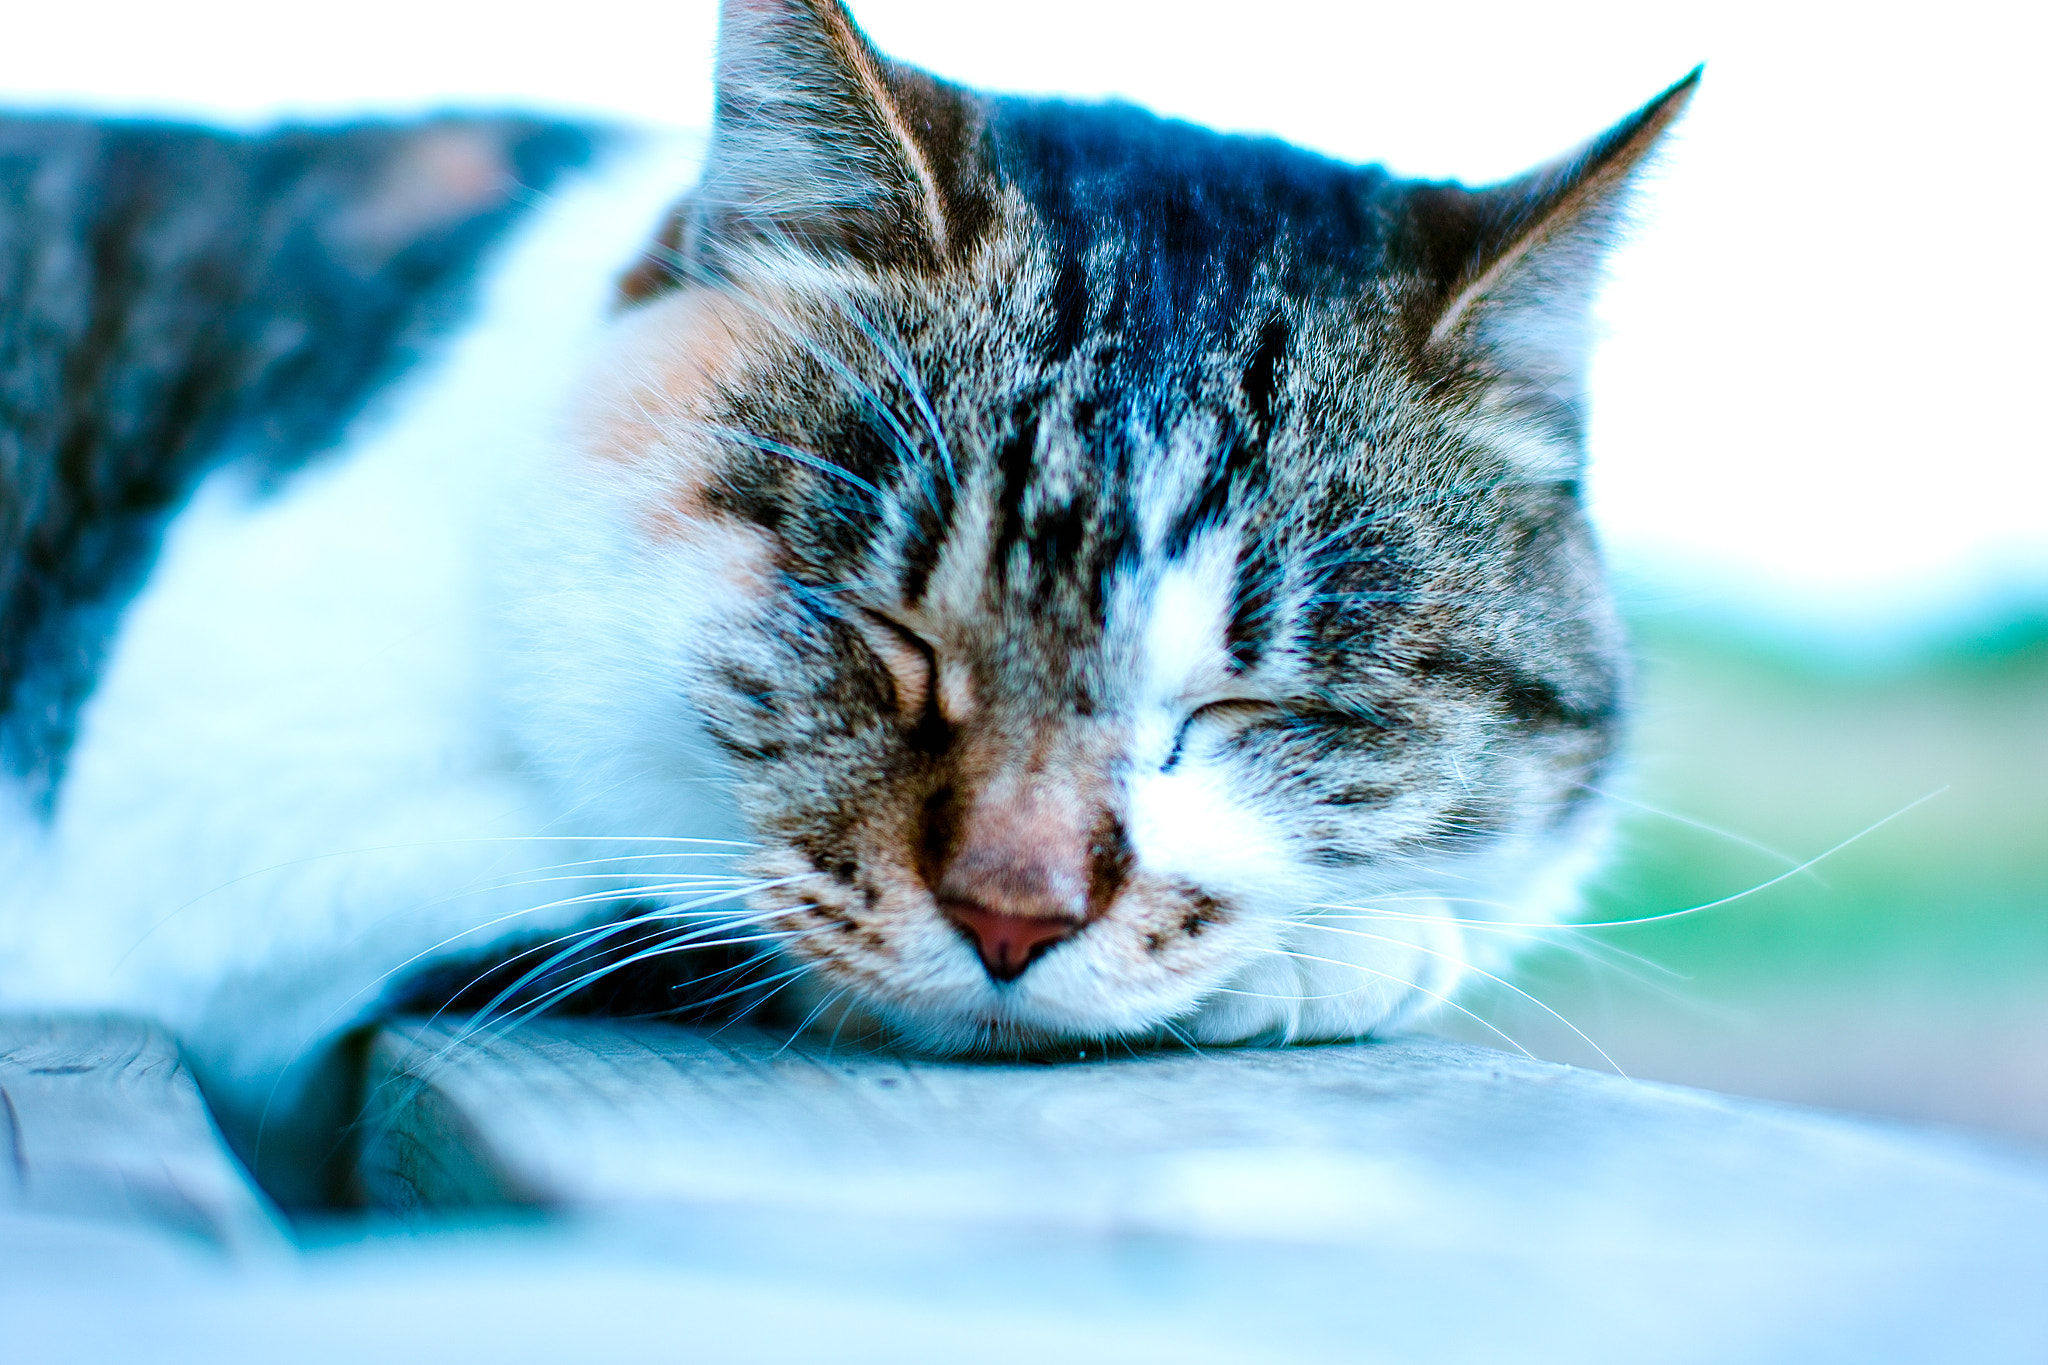 Sigma SD15 sample photo. Cat every day photography